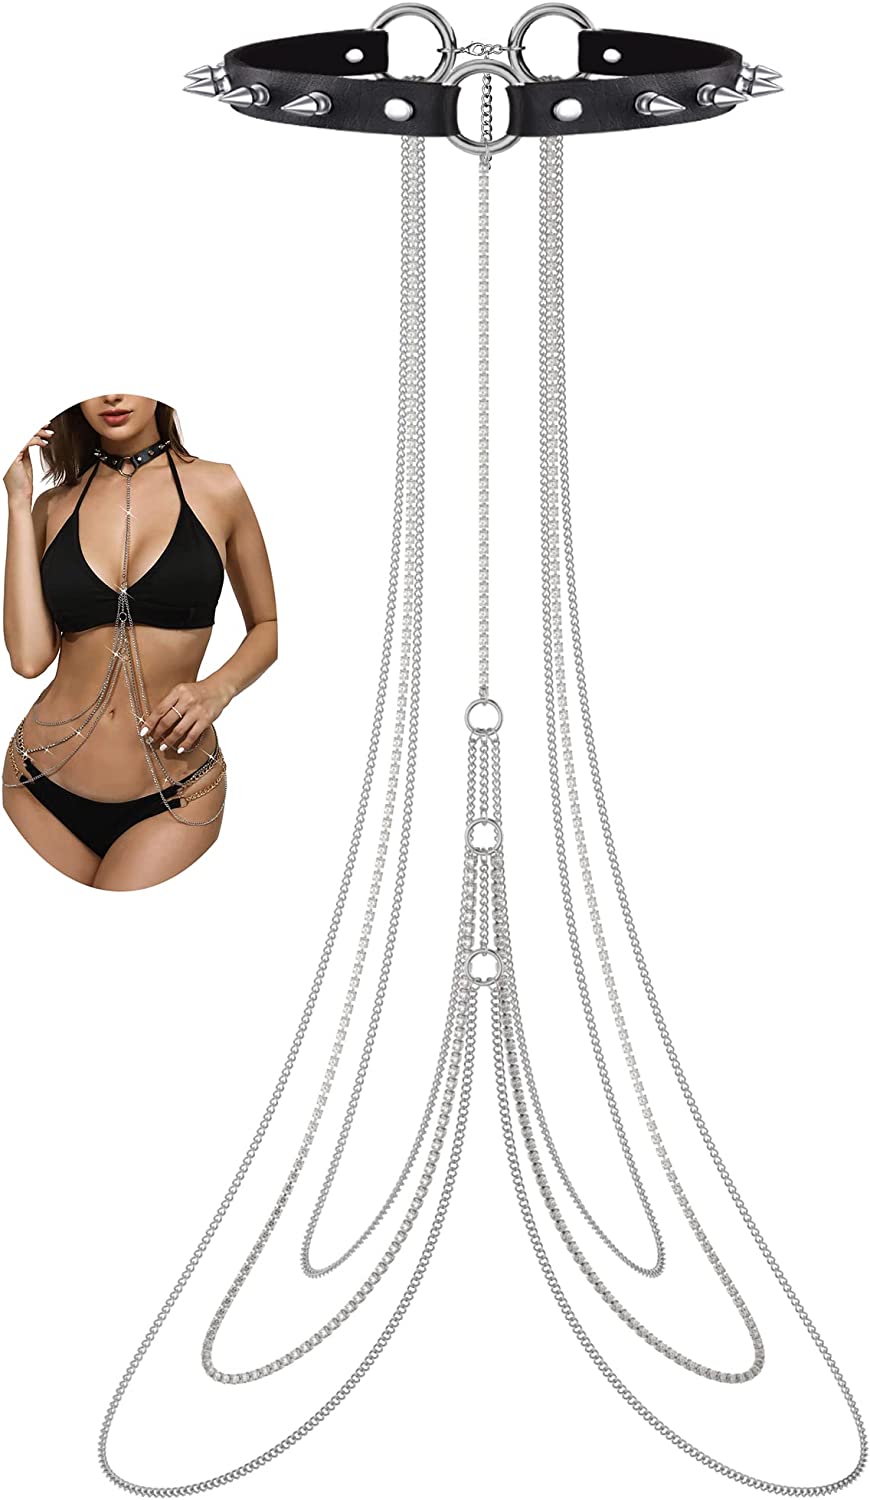 Rhinestones Body Chains for Women and Girls Rave Accessories Gothic Spiked Punk Necklace Waist Chain Suitable for Variety of Carnival scenes.